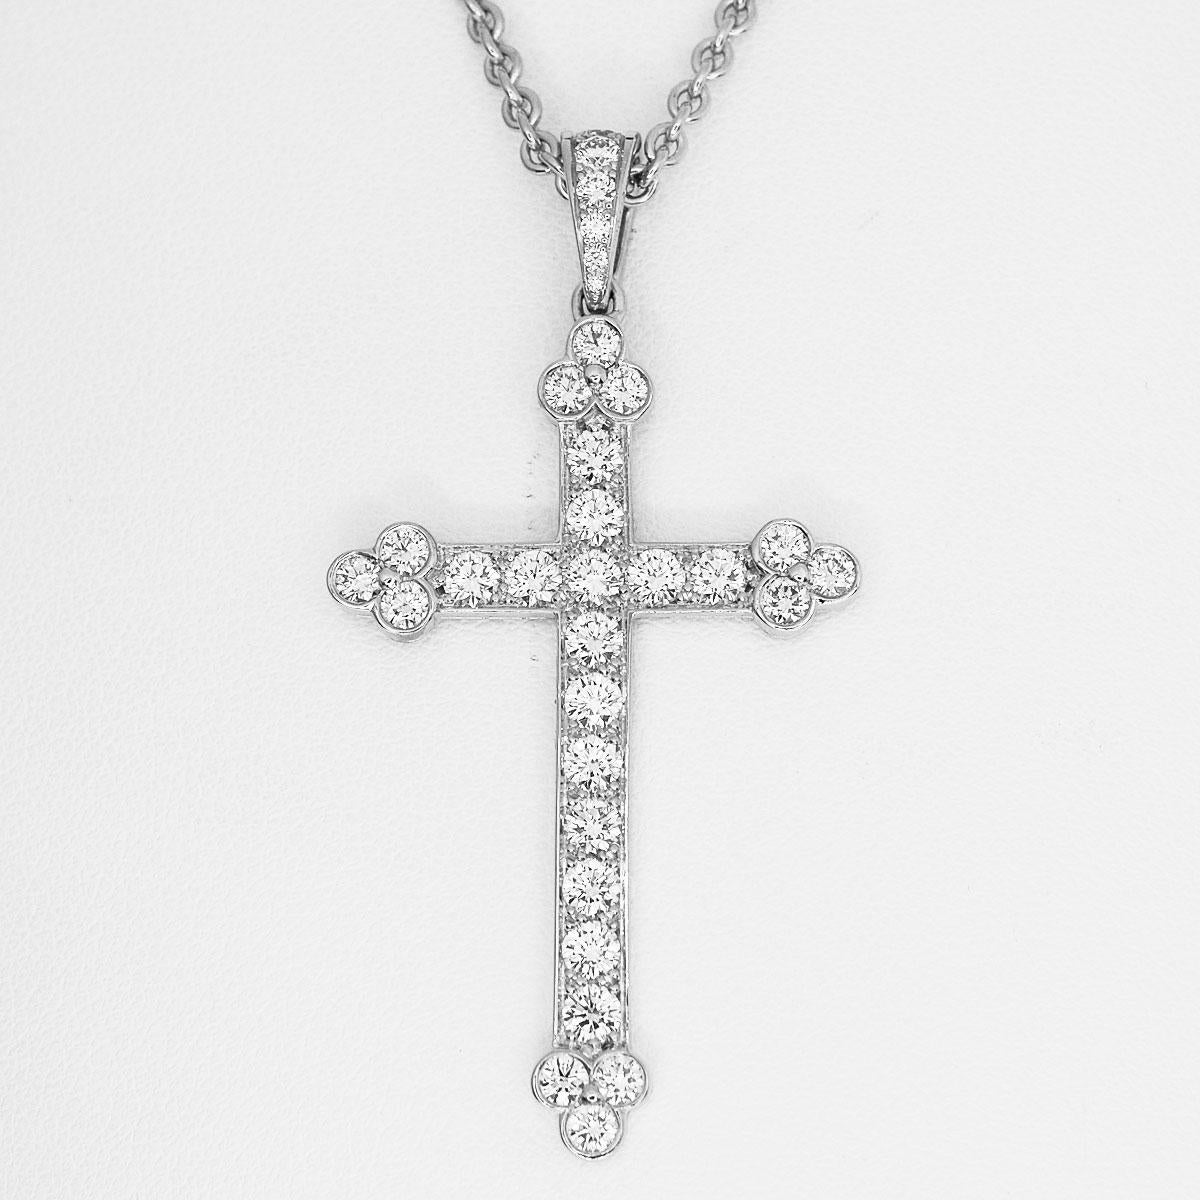 Brand:Cartier
Name:Diamond cross chain pendant necklace
Material :Diamond, 750 K18 WG White Gold
Comes with:Cartier case, Cartier pendant repair certificate (Feb 2019)
Necklace length(inch) :42cm / 16.53